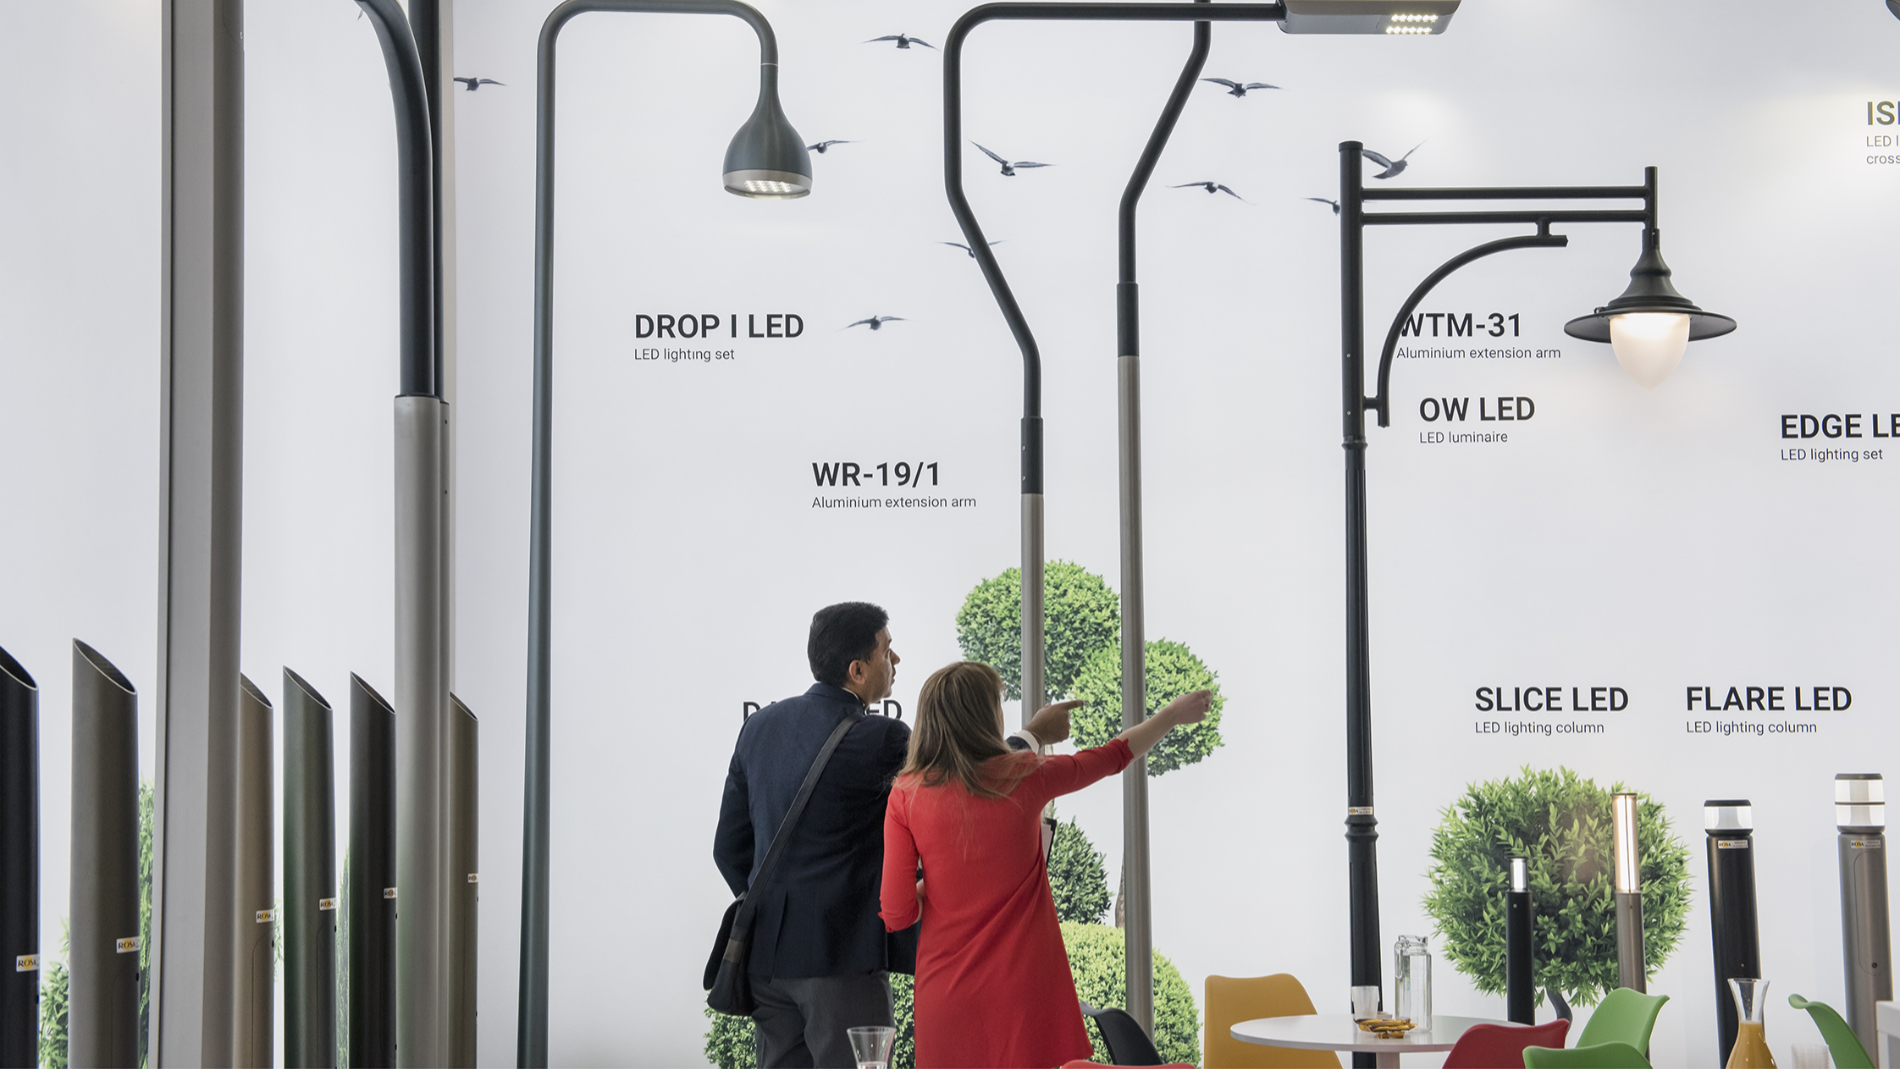 Modern street lighting: ensures safety, combines more than one function and uses energy-saving components. (Source: Messe Frankfurt Exhition GmbH / Petra Welzel)